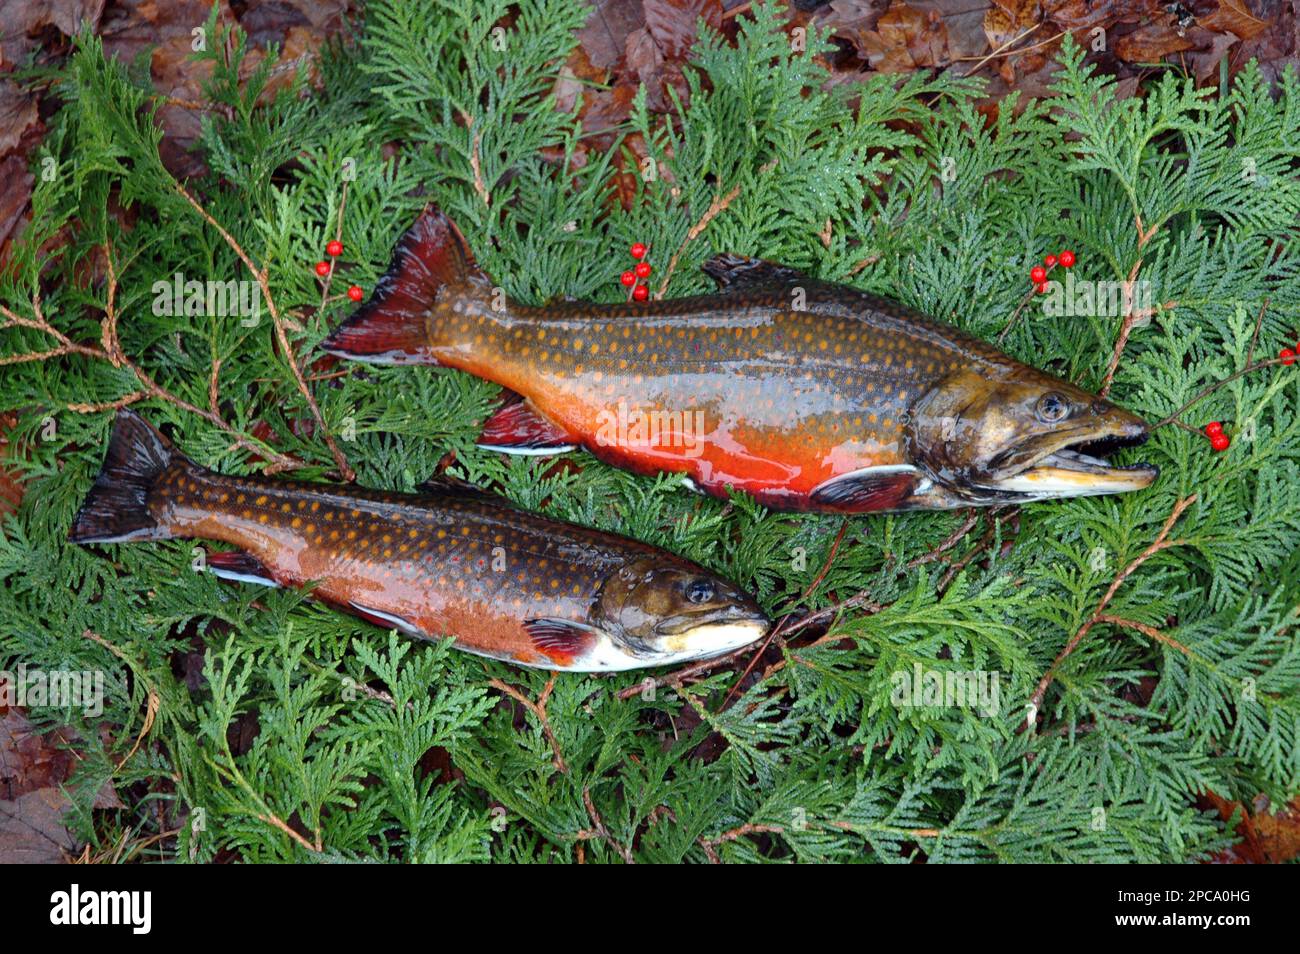 ADVANCE FOR THE WEEKEND, NOV. 24-26 ** Two brook trout lie on an evergreen,  Wednesday, Oct. 25, 2006, at Mountain Pond near Paul Smiths, N.Y.  Fertilized trout eggs were taken to